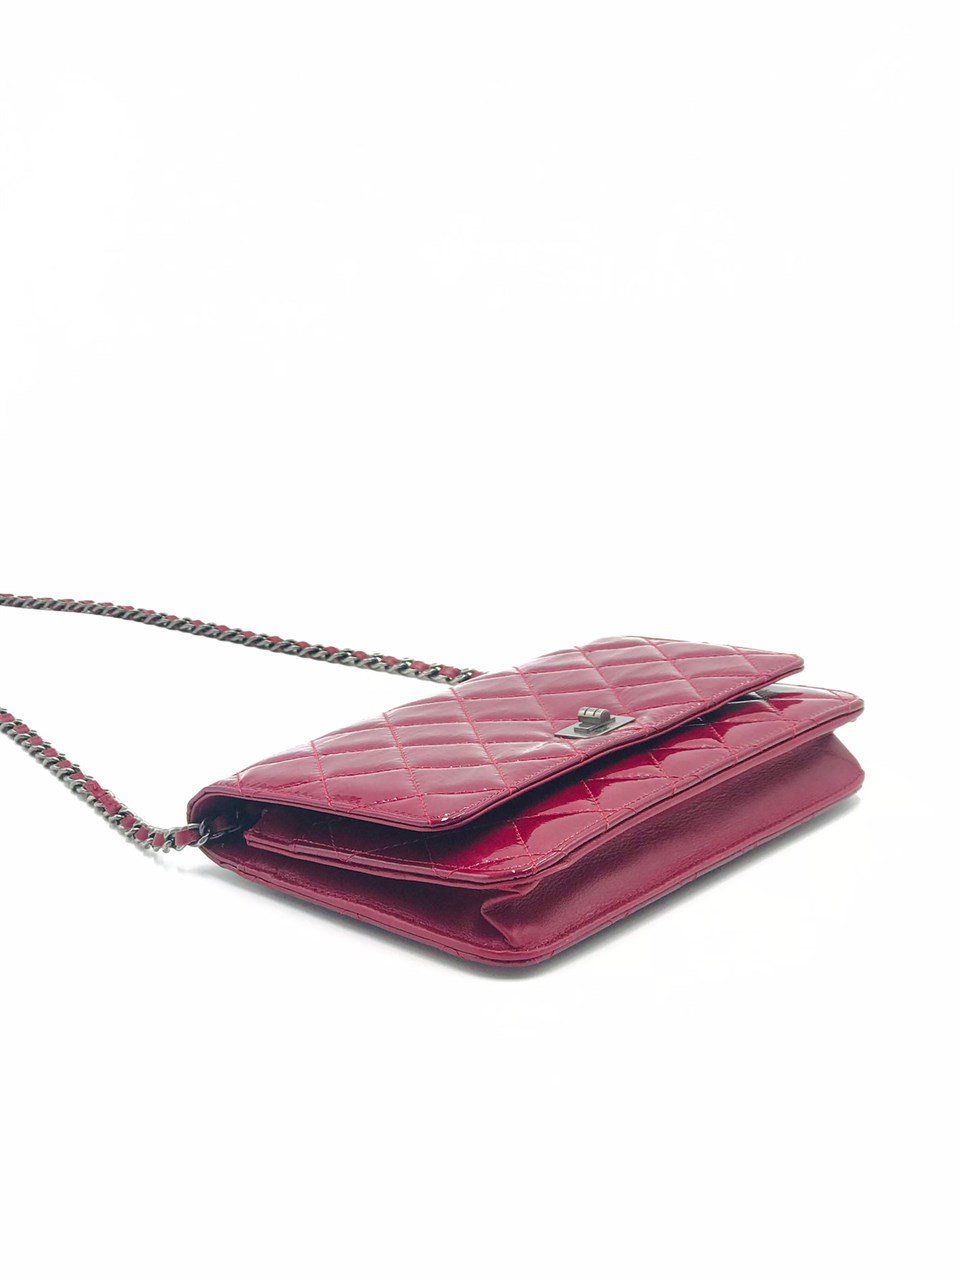 Chanel Reissue Mini, Bright Pink Calfskin with Silver Hardware, Preowned in  Dustbag WA001